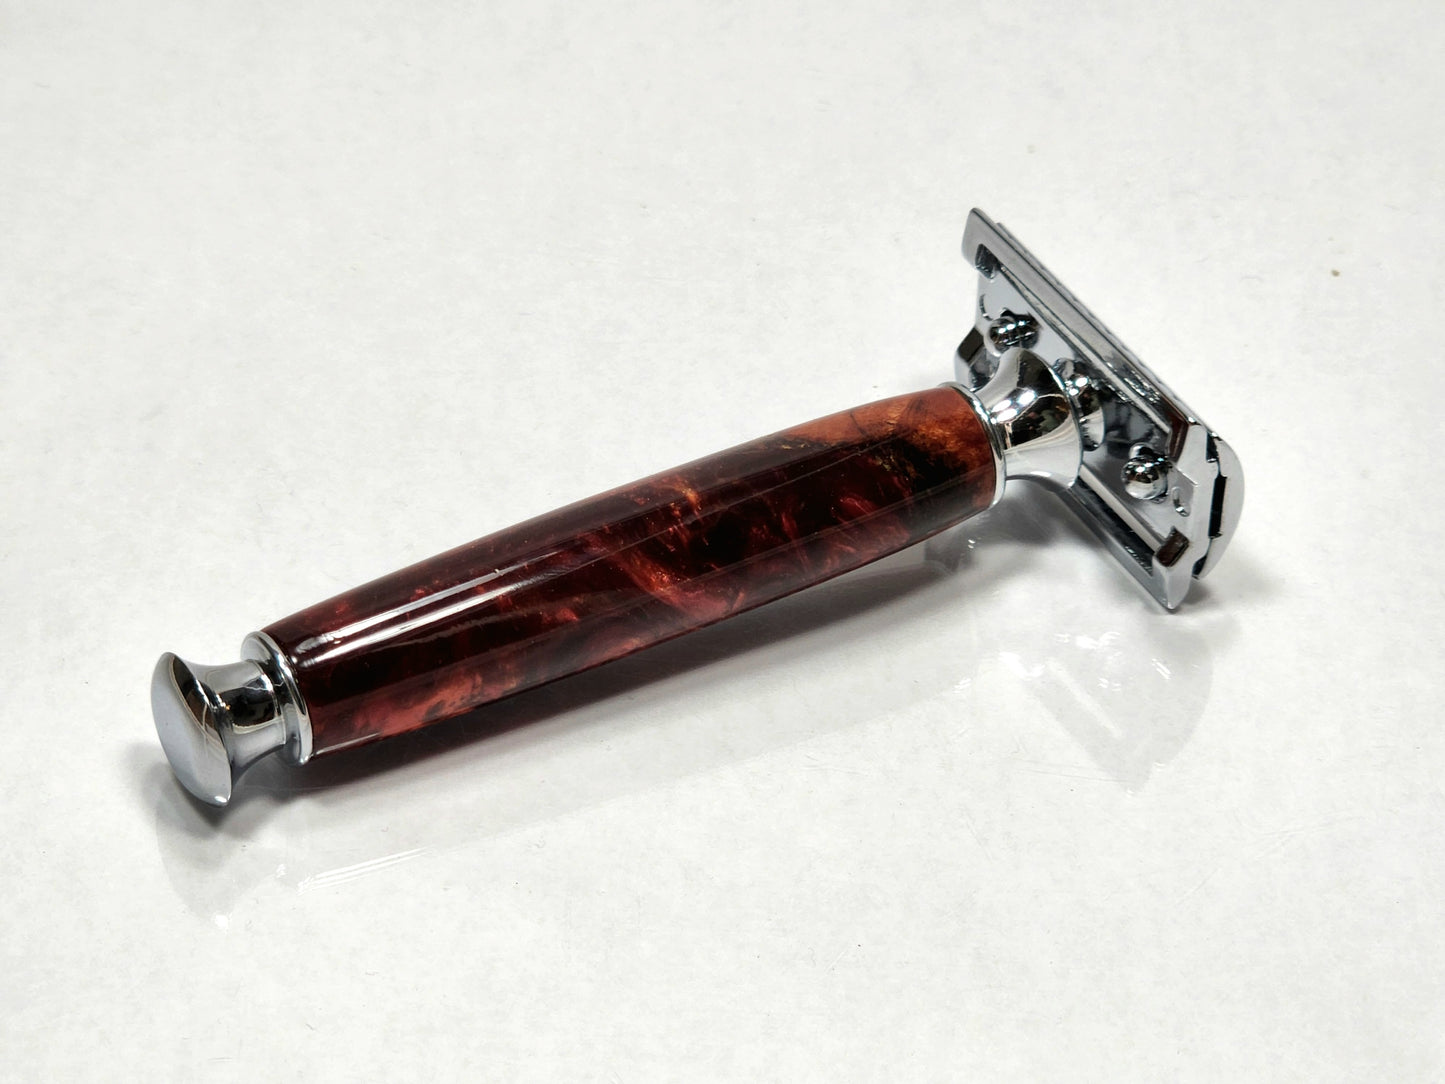 Elegant Handcrafted Hybrid Wood/Acrylic Classic Safety Razor with Chrome-Plated Brass Components